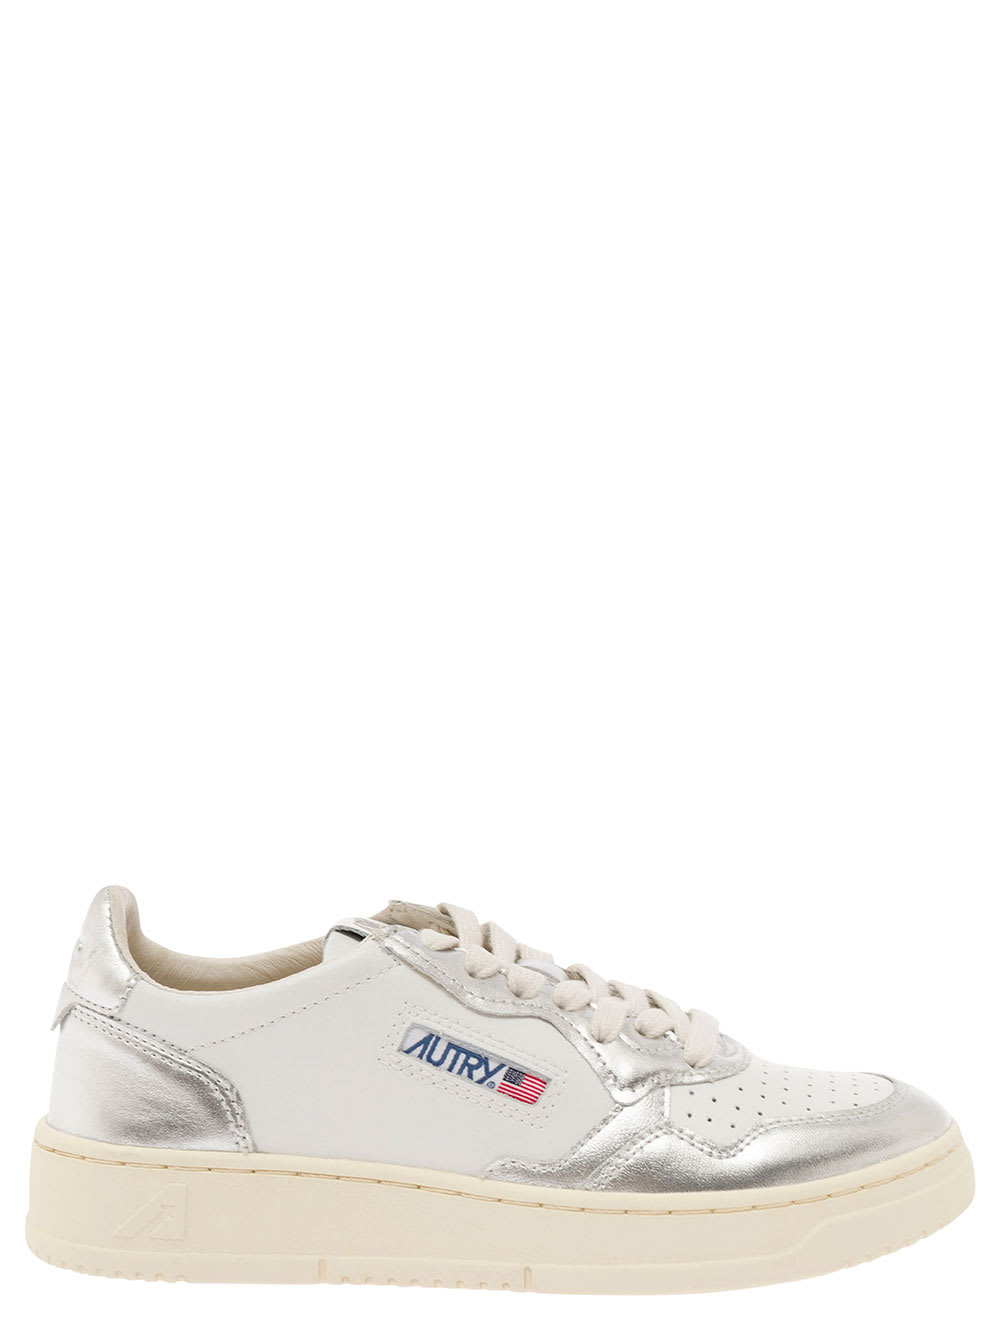 AUTRY MEDALIST WHITE AND SILVER LOW TOP SNEAKERS WITH LOGO PATCH IN LEATHER WOMAN